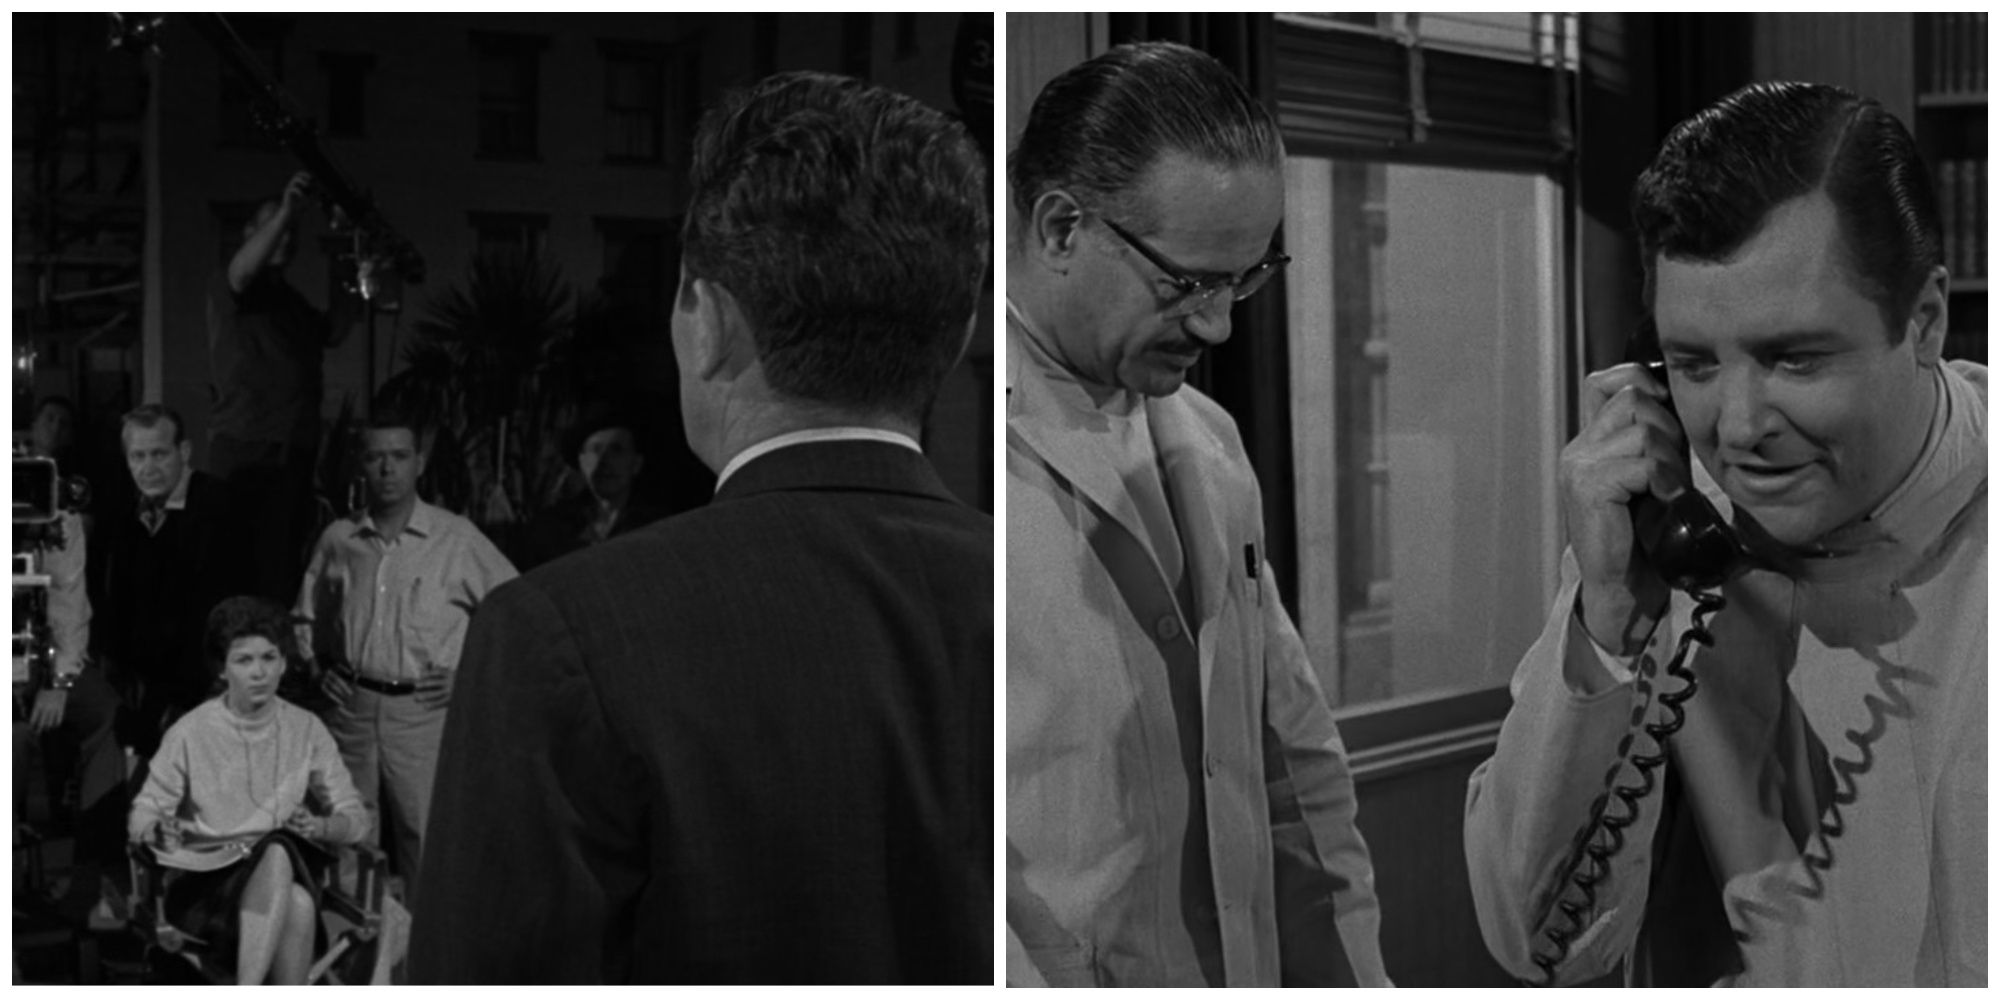 Split image showing stills from two Twilight Zone episodes (